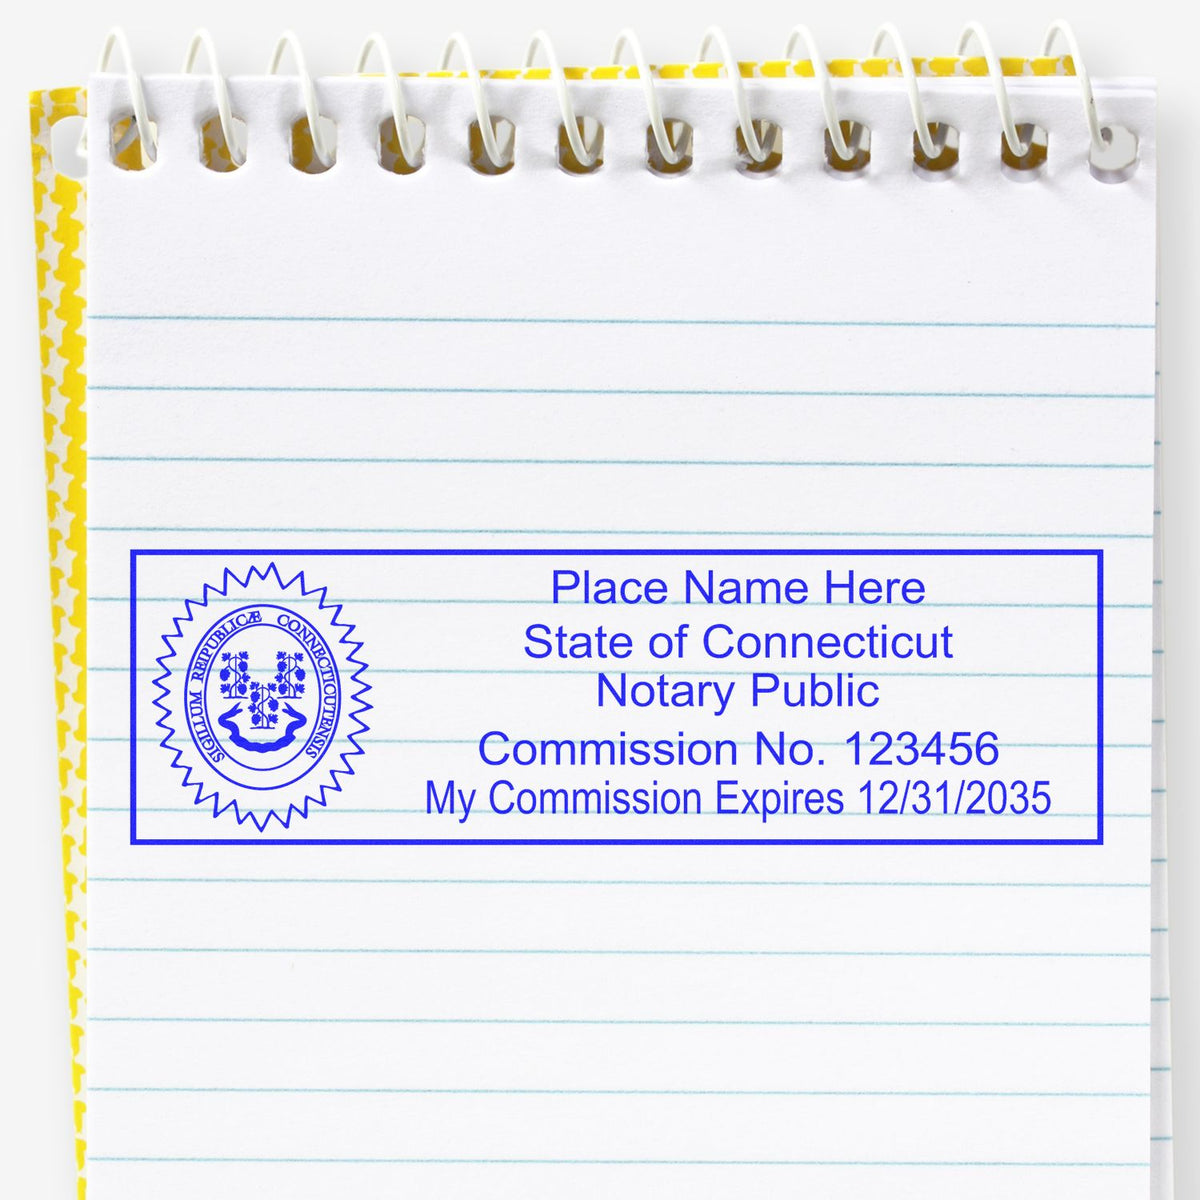 An alternative view of the Heavy-Duty Connecticut Rectangular Notary Stamp stamped on a sheet of paper showing the image in use